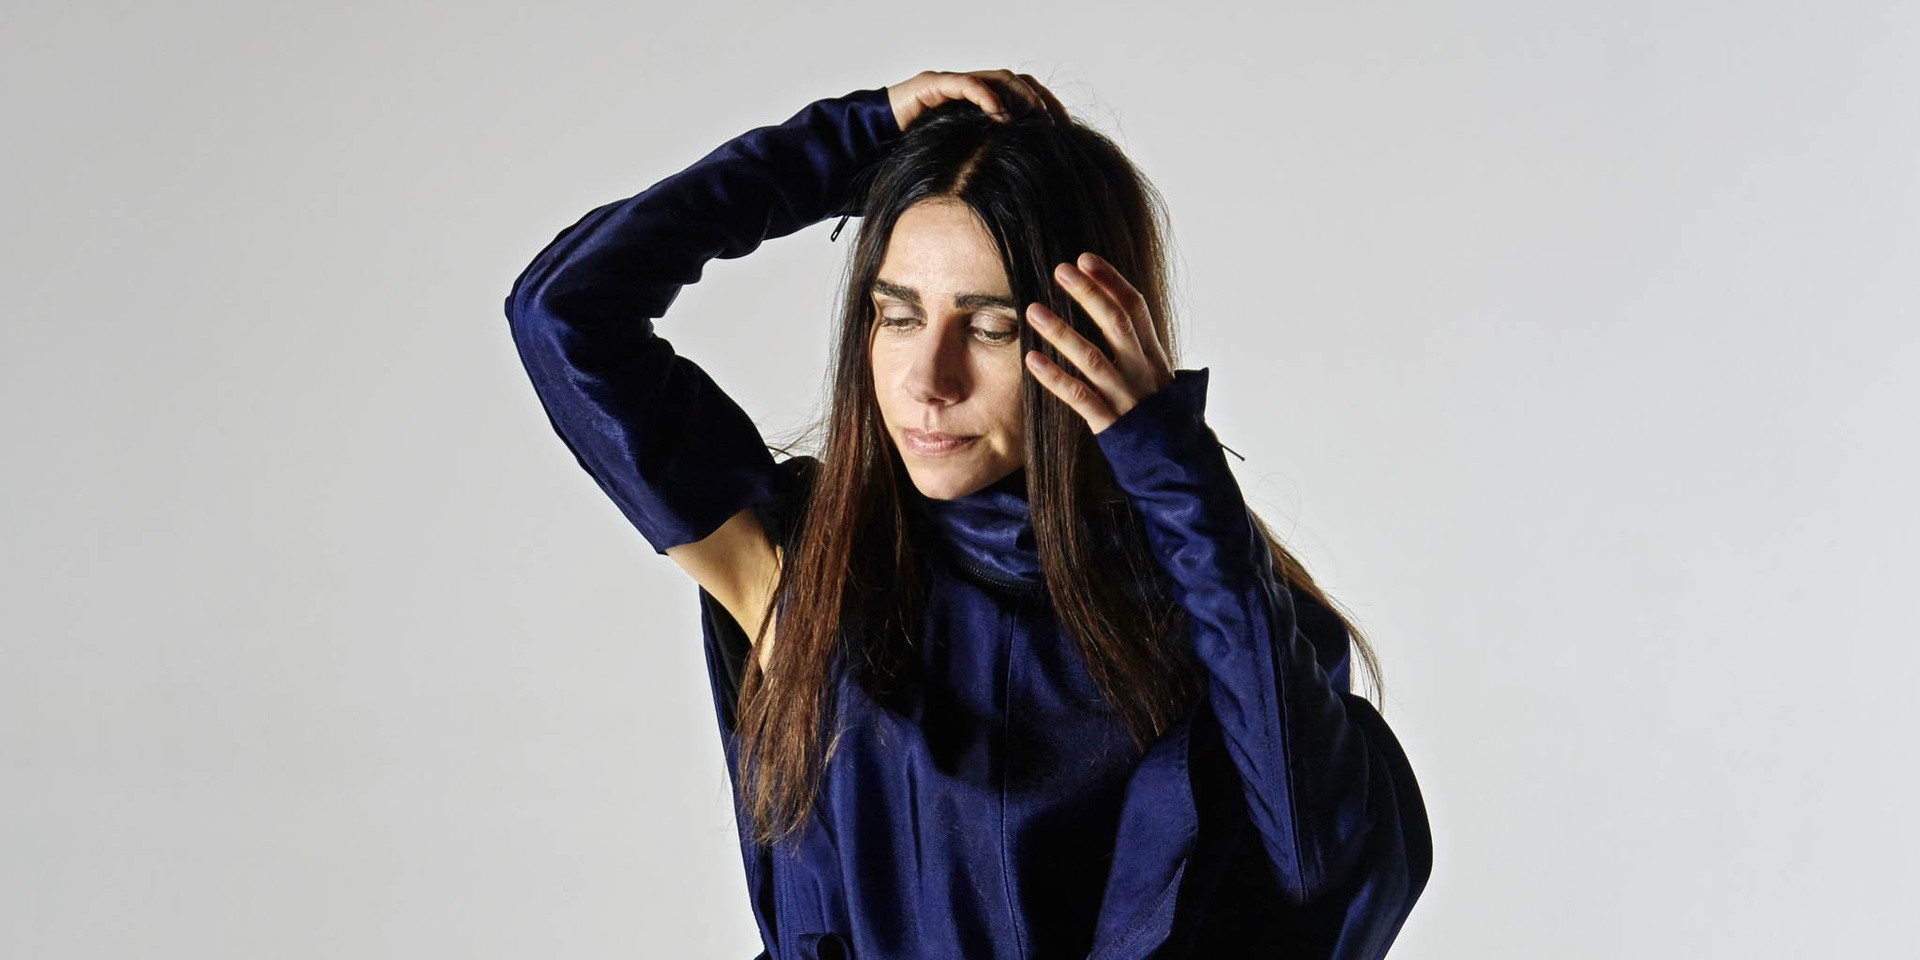 PJ Harvey will sign her new book of poetry before her show in Singapore